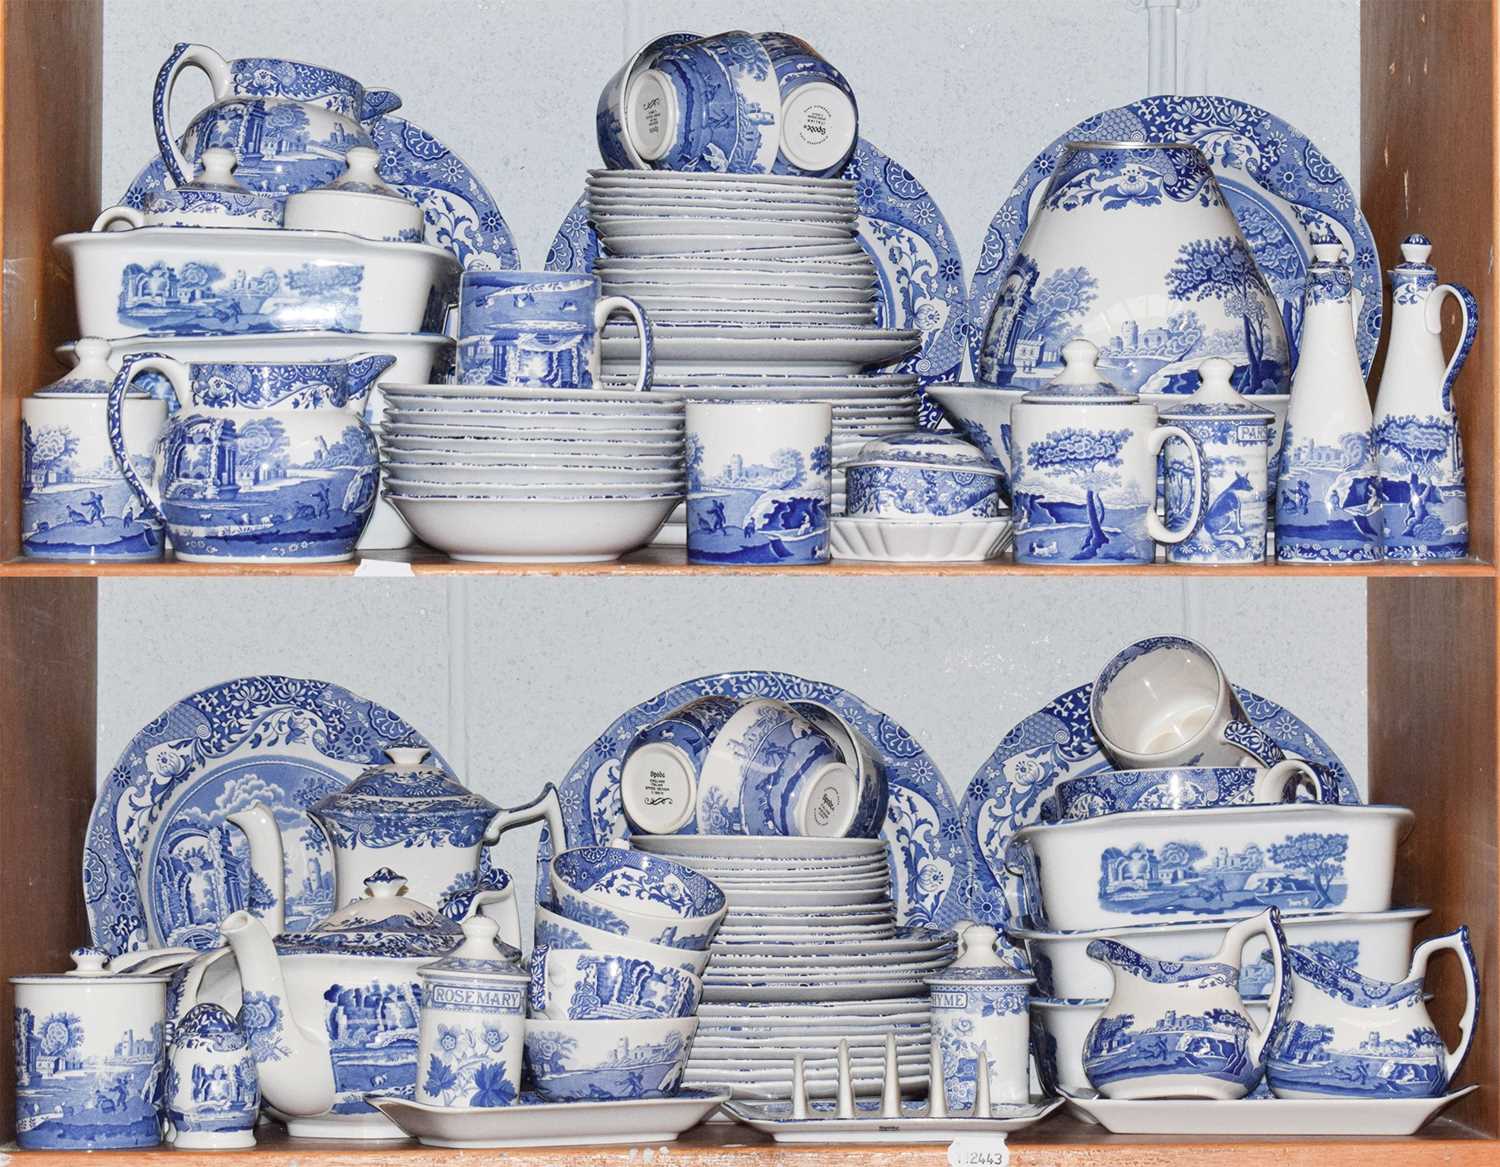 A very large quantity of modern Spode blue & white pottery in patterns, Italian landscapes, and